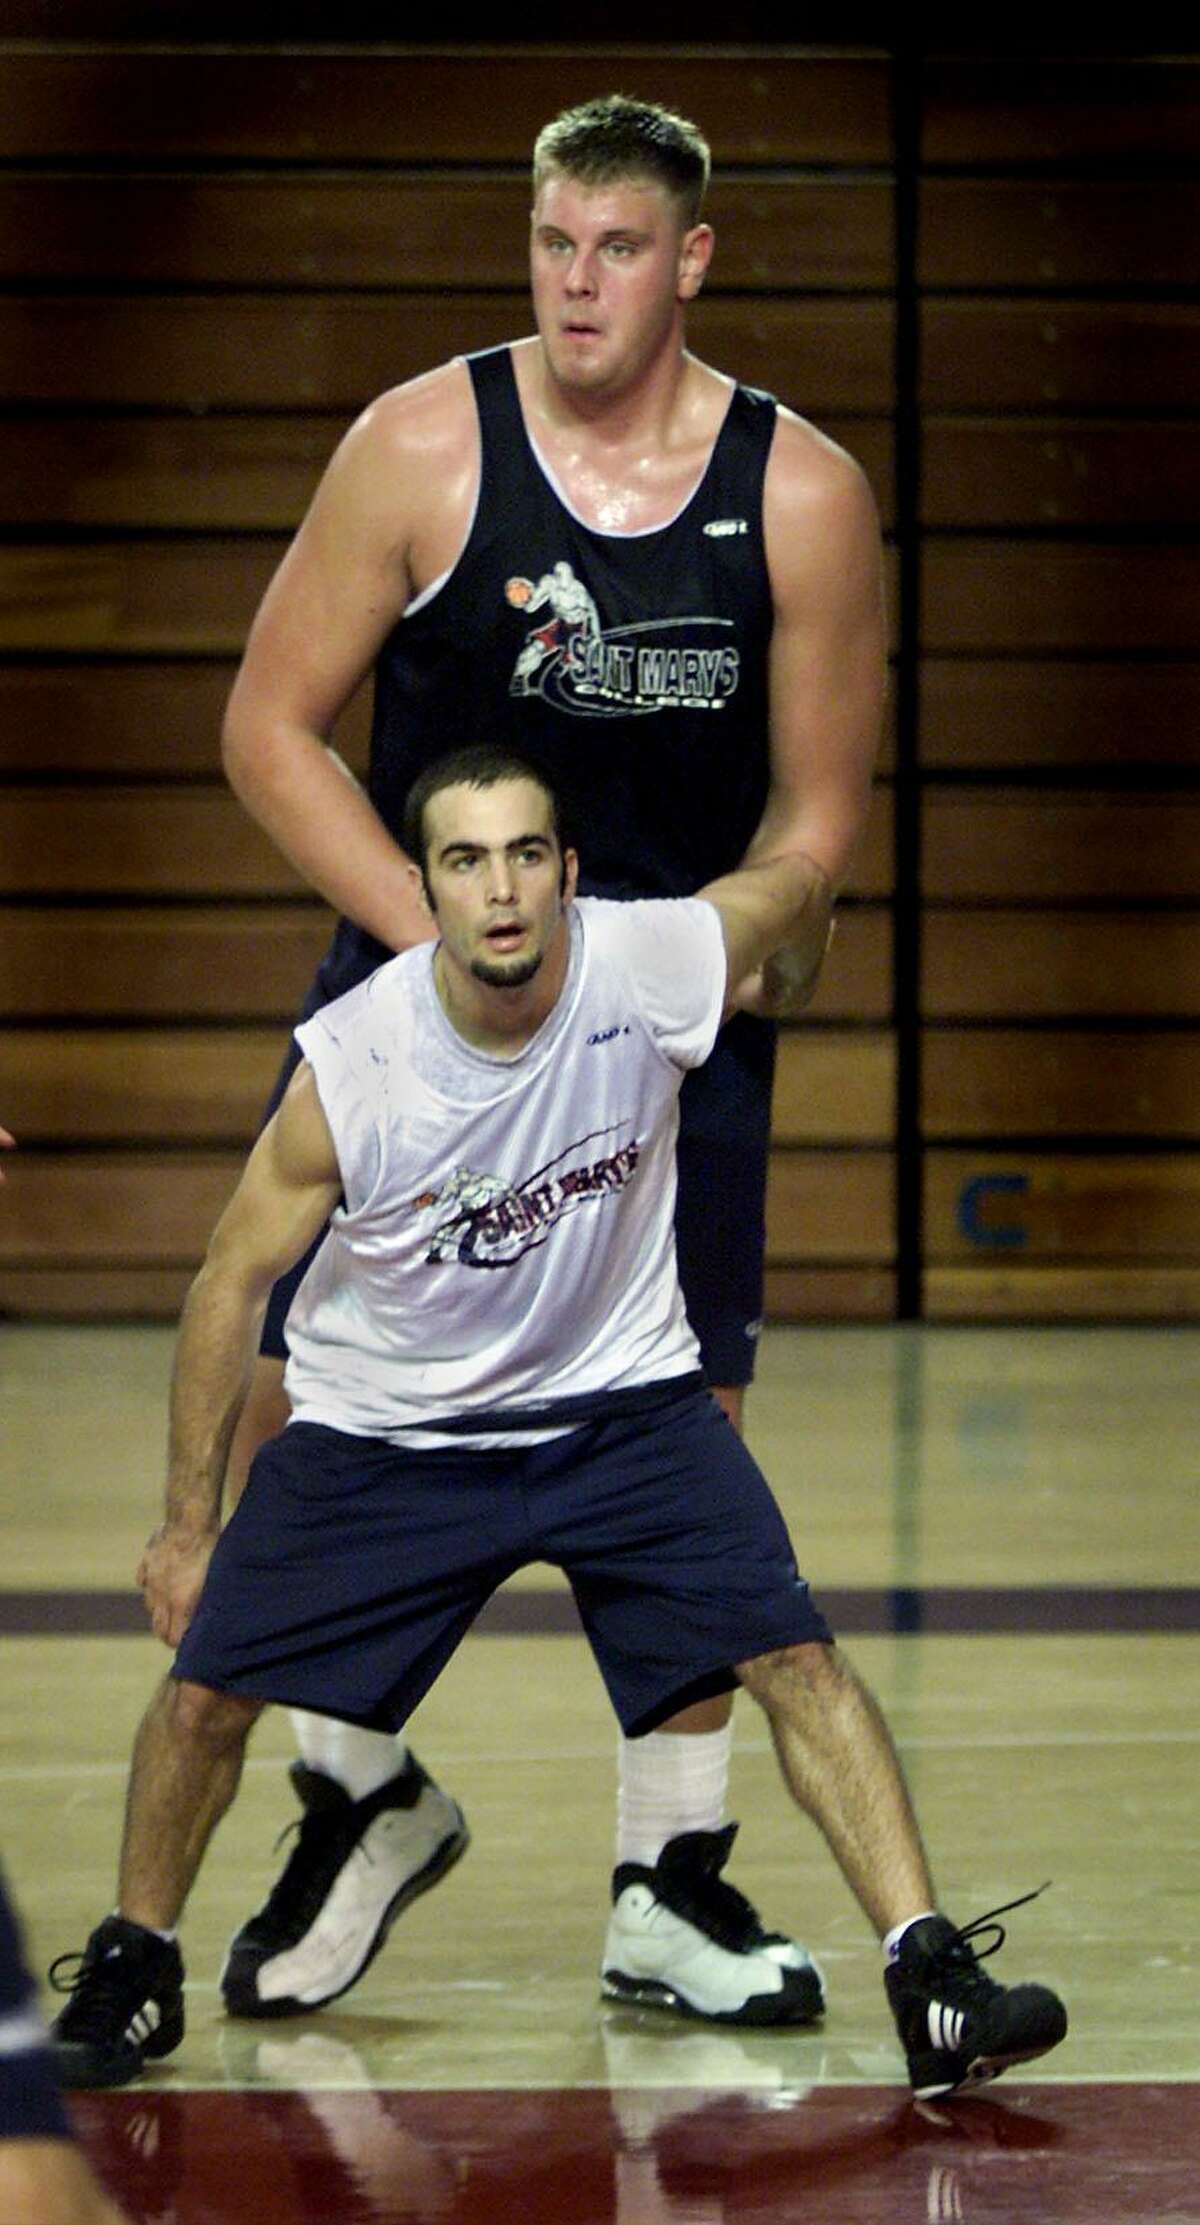 ST MARY'SMILLARD-C-03NOV99-SP-MJM St Mary's seven foot basketball center Brad Millard is even bigger this year. He dwarfs over team mate Frank Allocco during an early morning practice. CHRONICLE PHOTO BY MICHAEL MALONEY